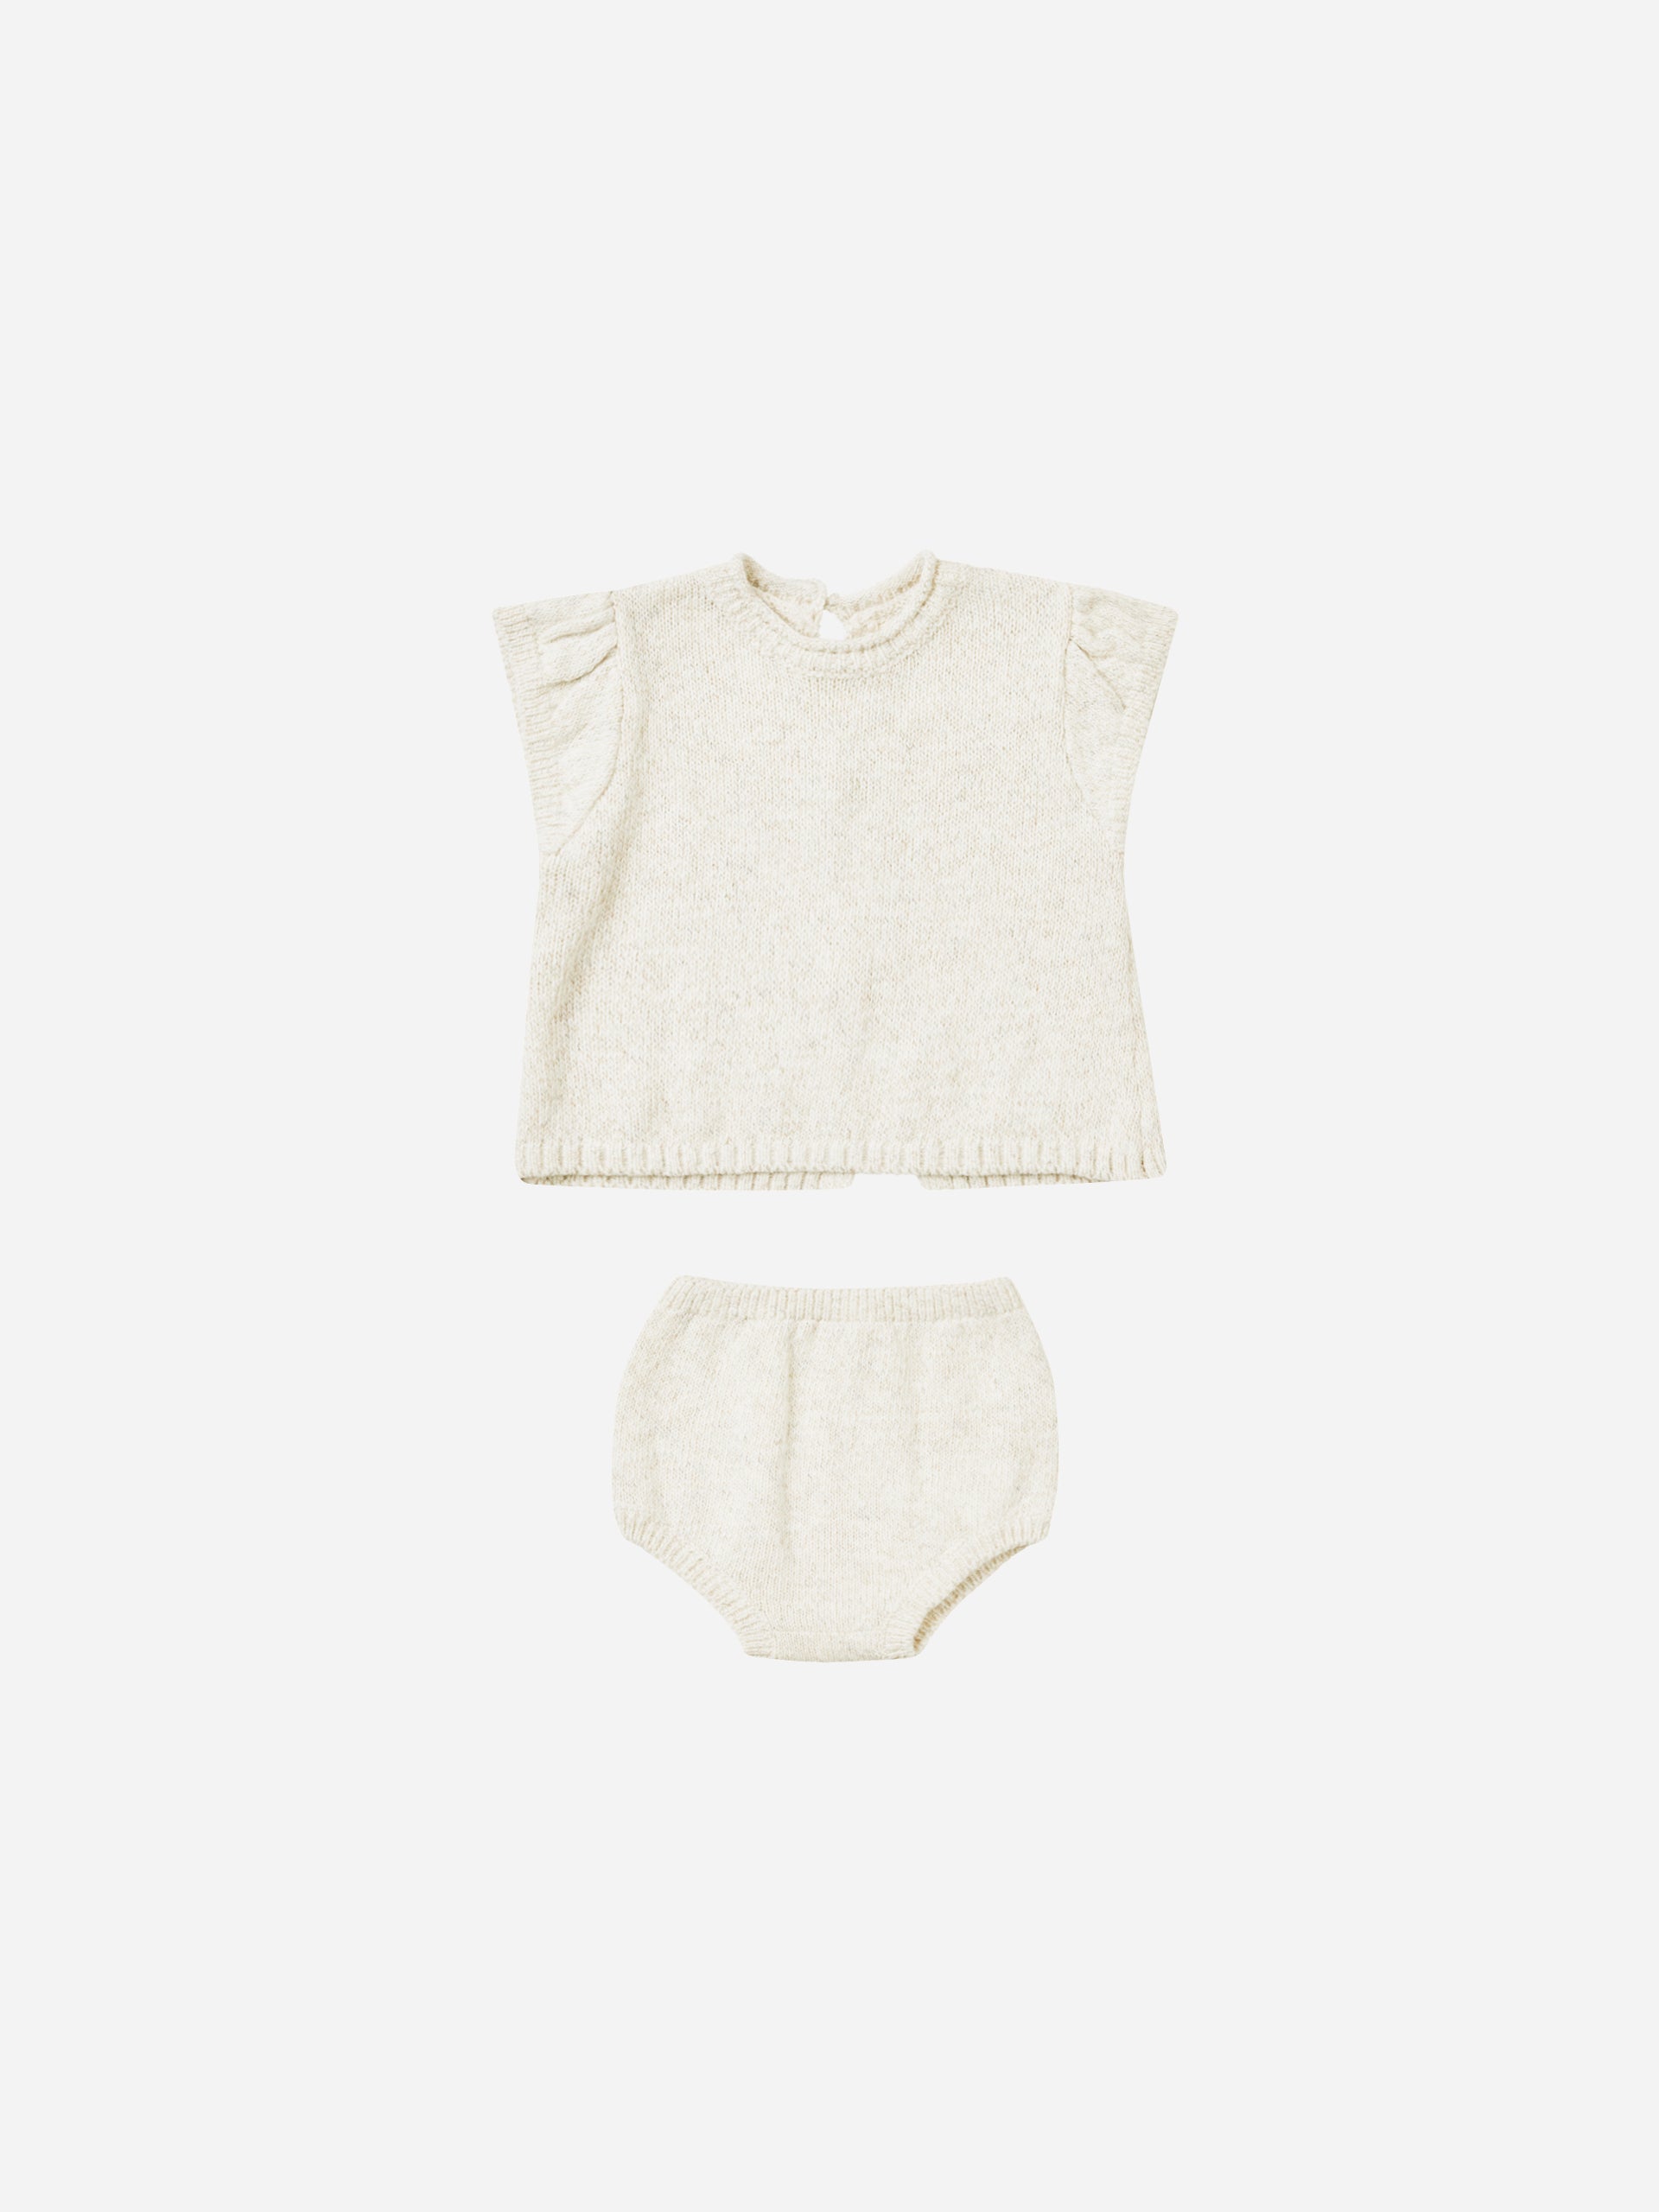 Penny Knit Set || Ivory - Rylee + Cru | Kids Clothes | Trendy Baby Clothes | Modern Infant Outfits |